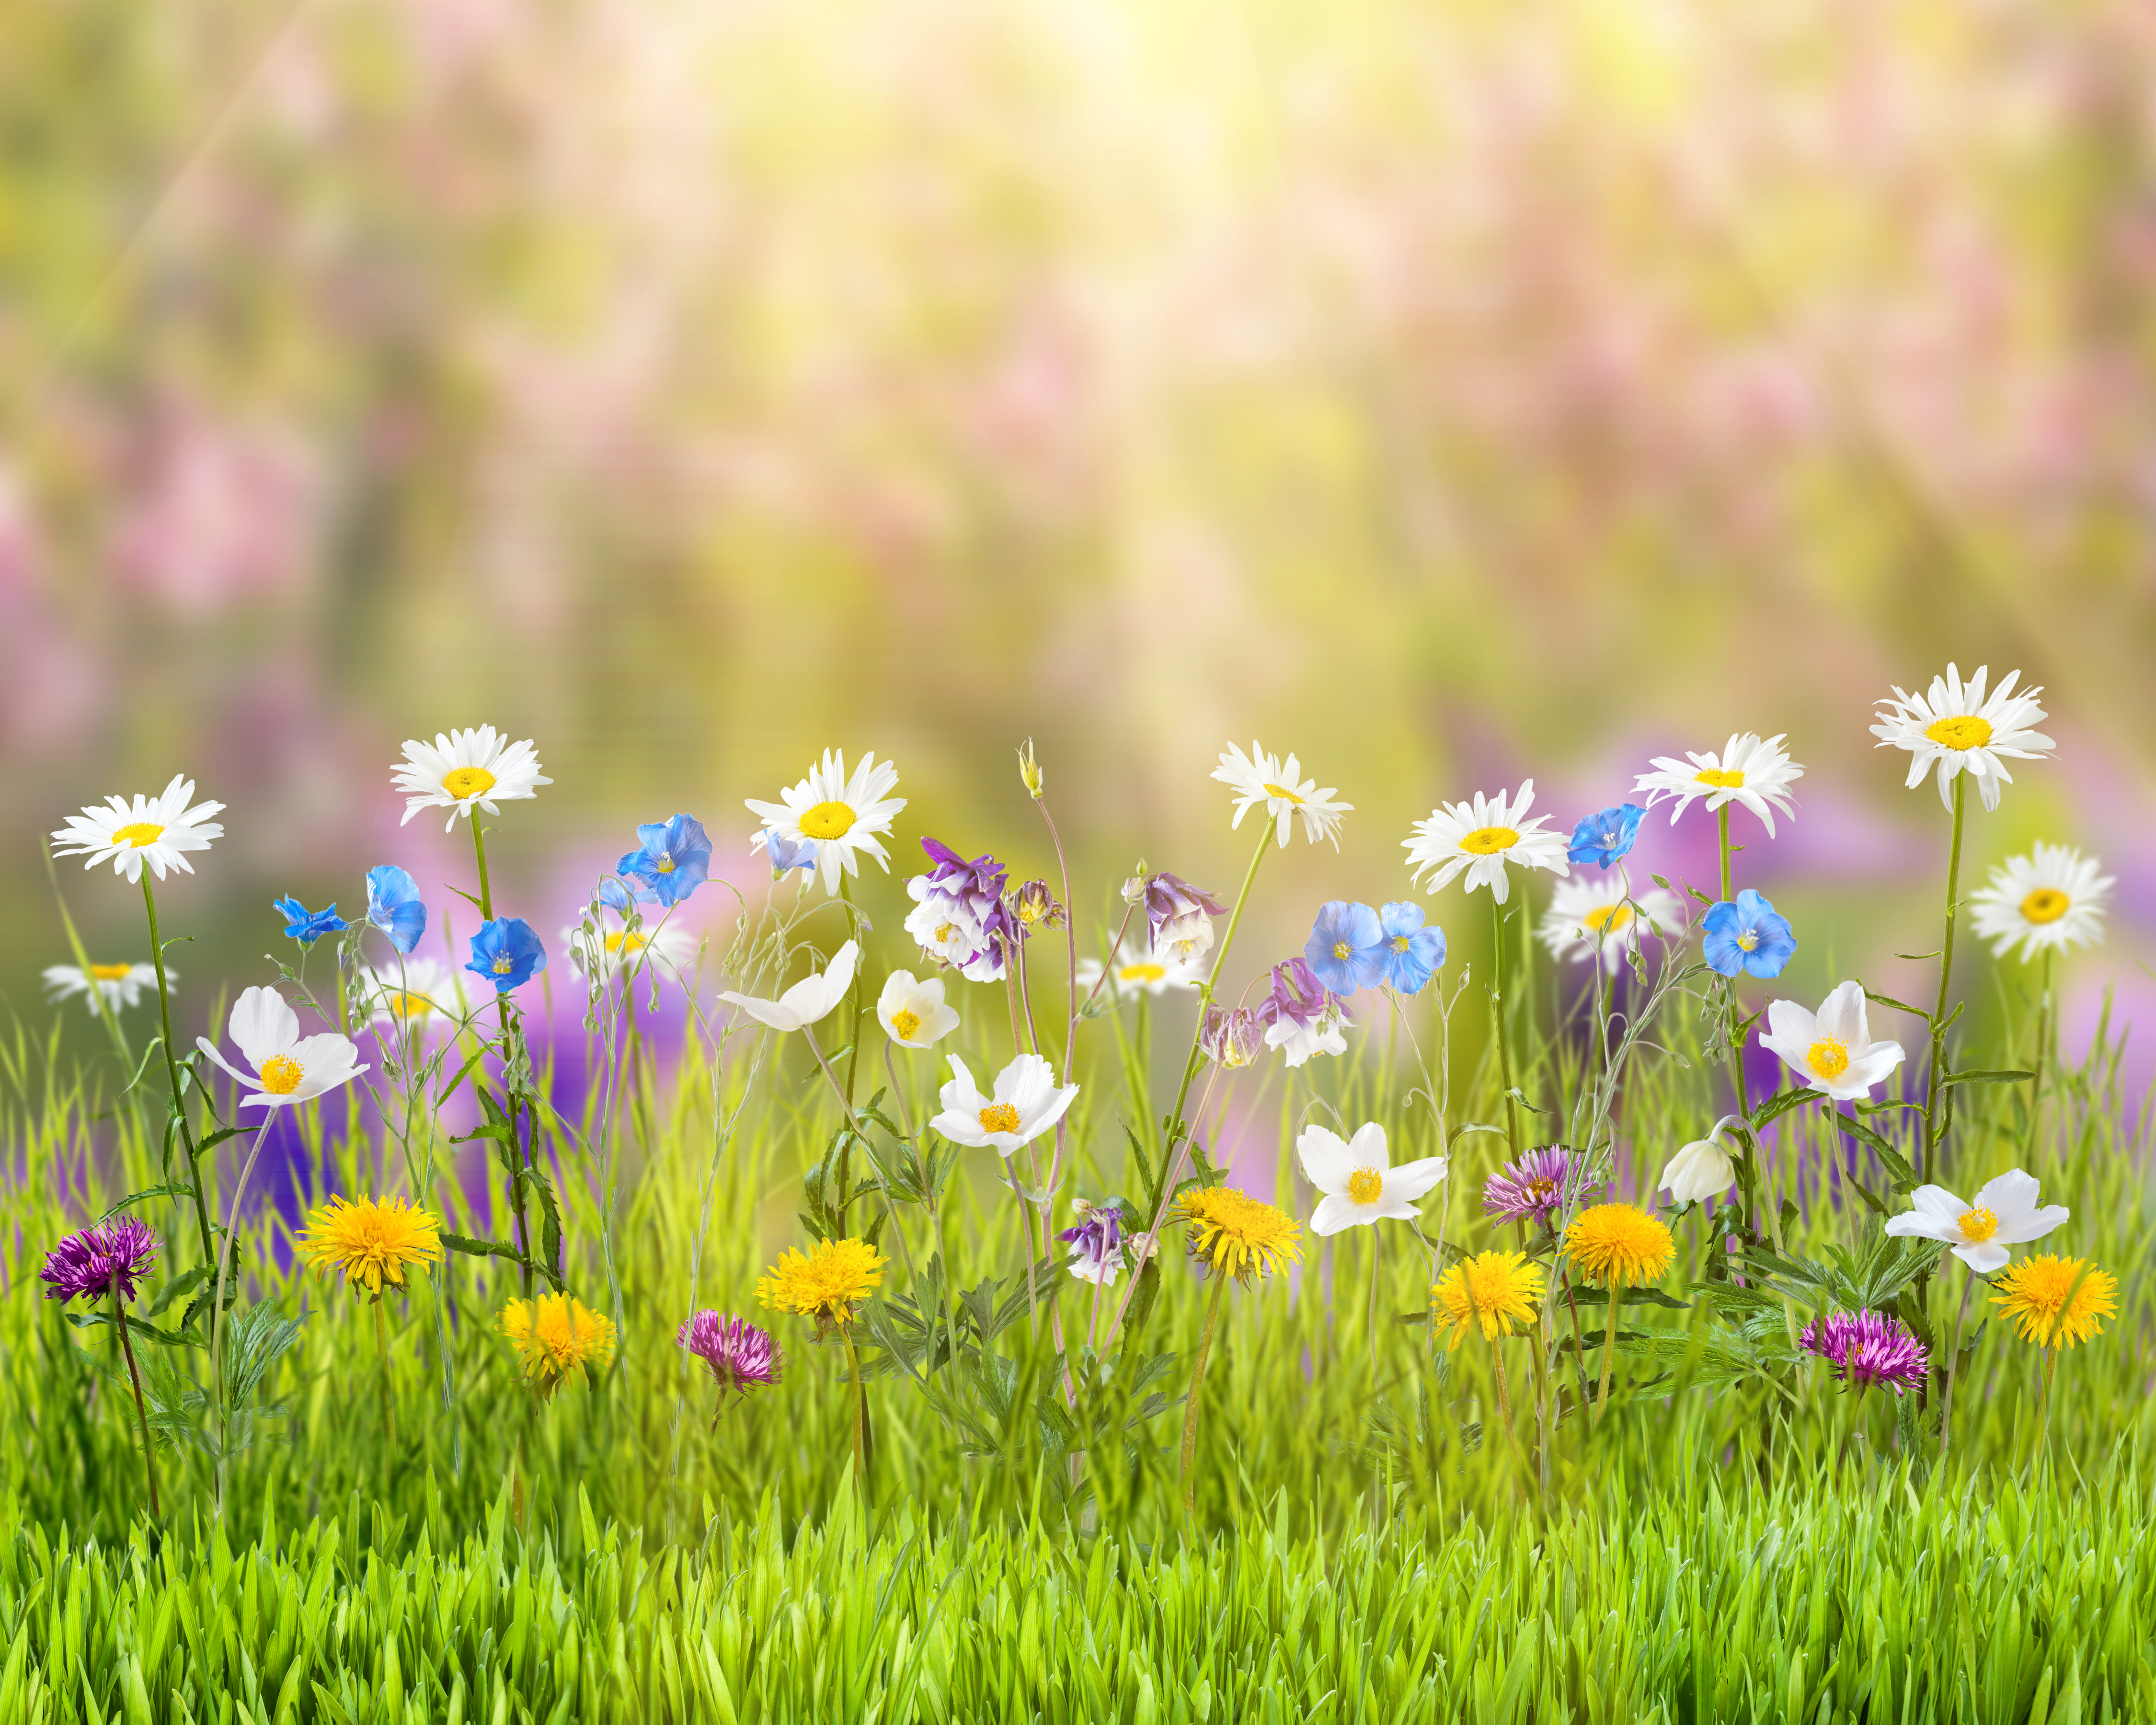 HD desktop wallpaper: Nature, Grass, Flower, Earth, Spring, Sunny, Yellow  Flower, White Flower download free picture #761811